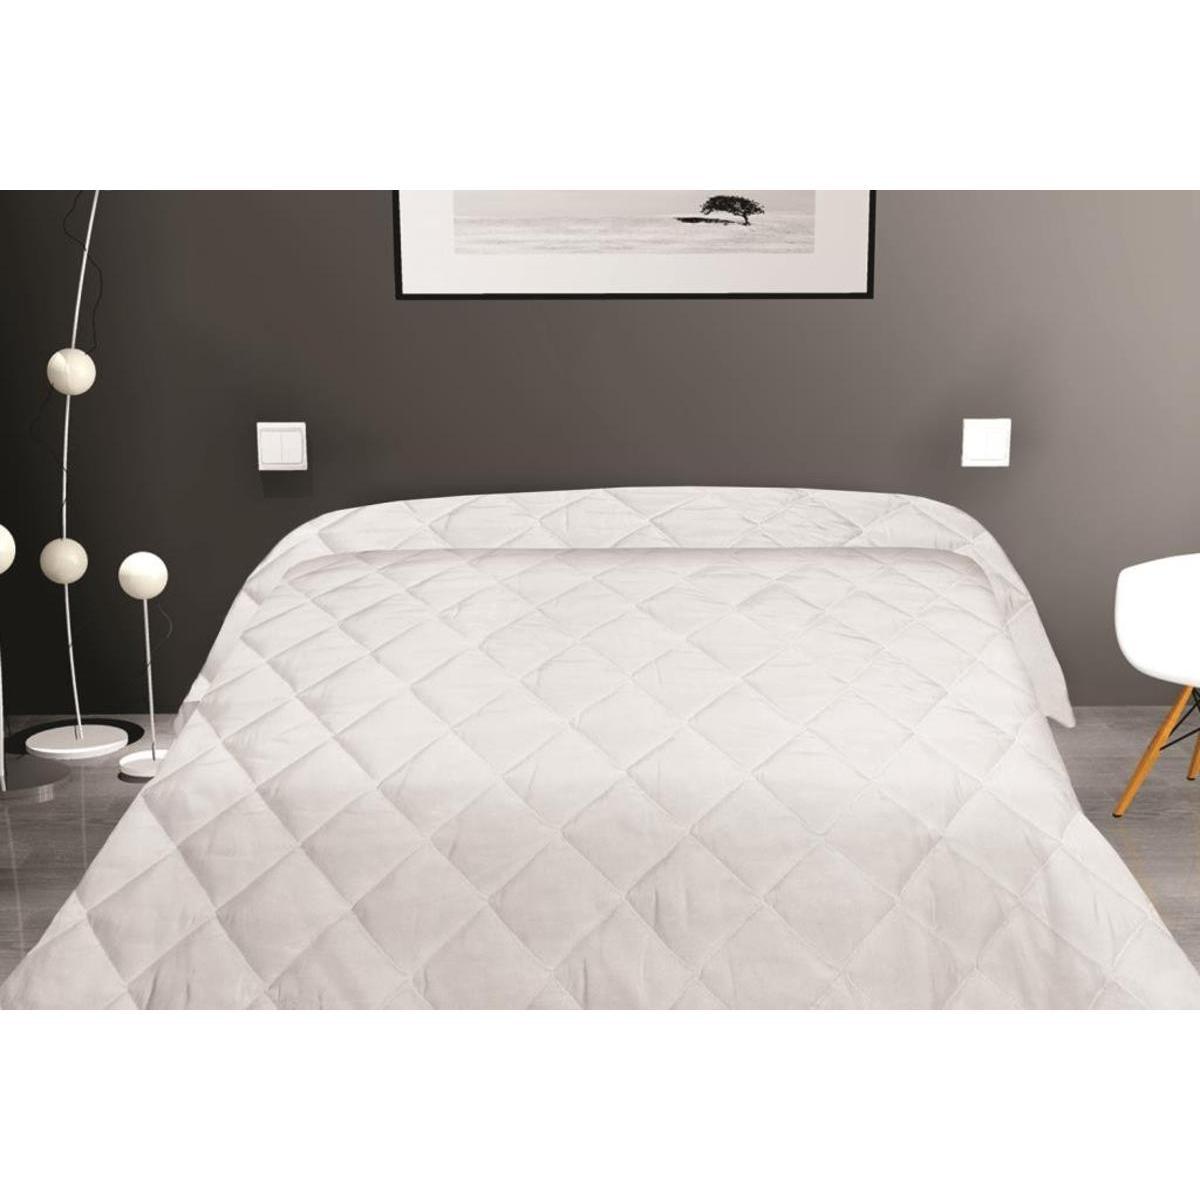 Couette blanche 550 gr luxe - 240 x 260 cm -